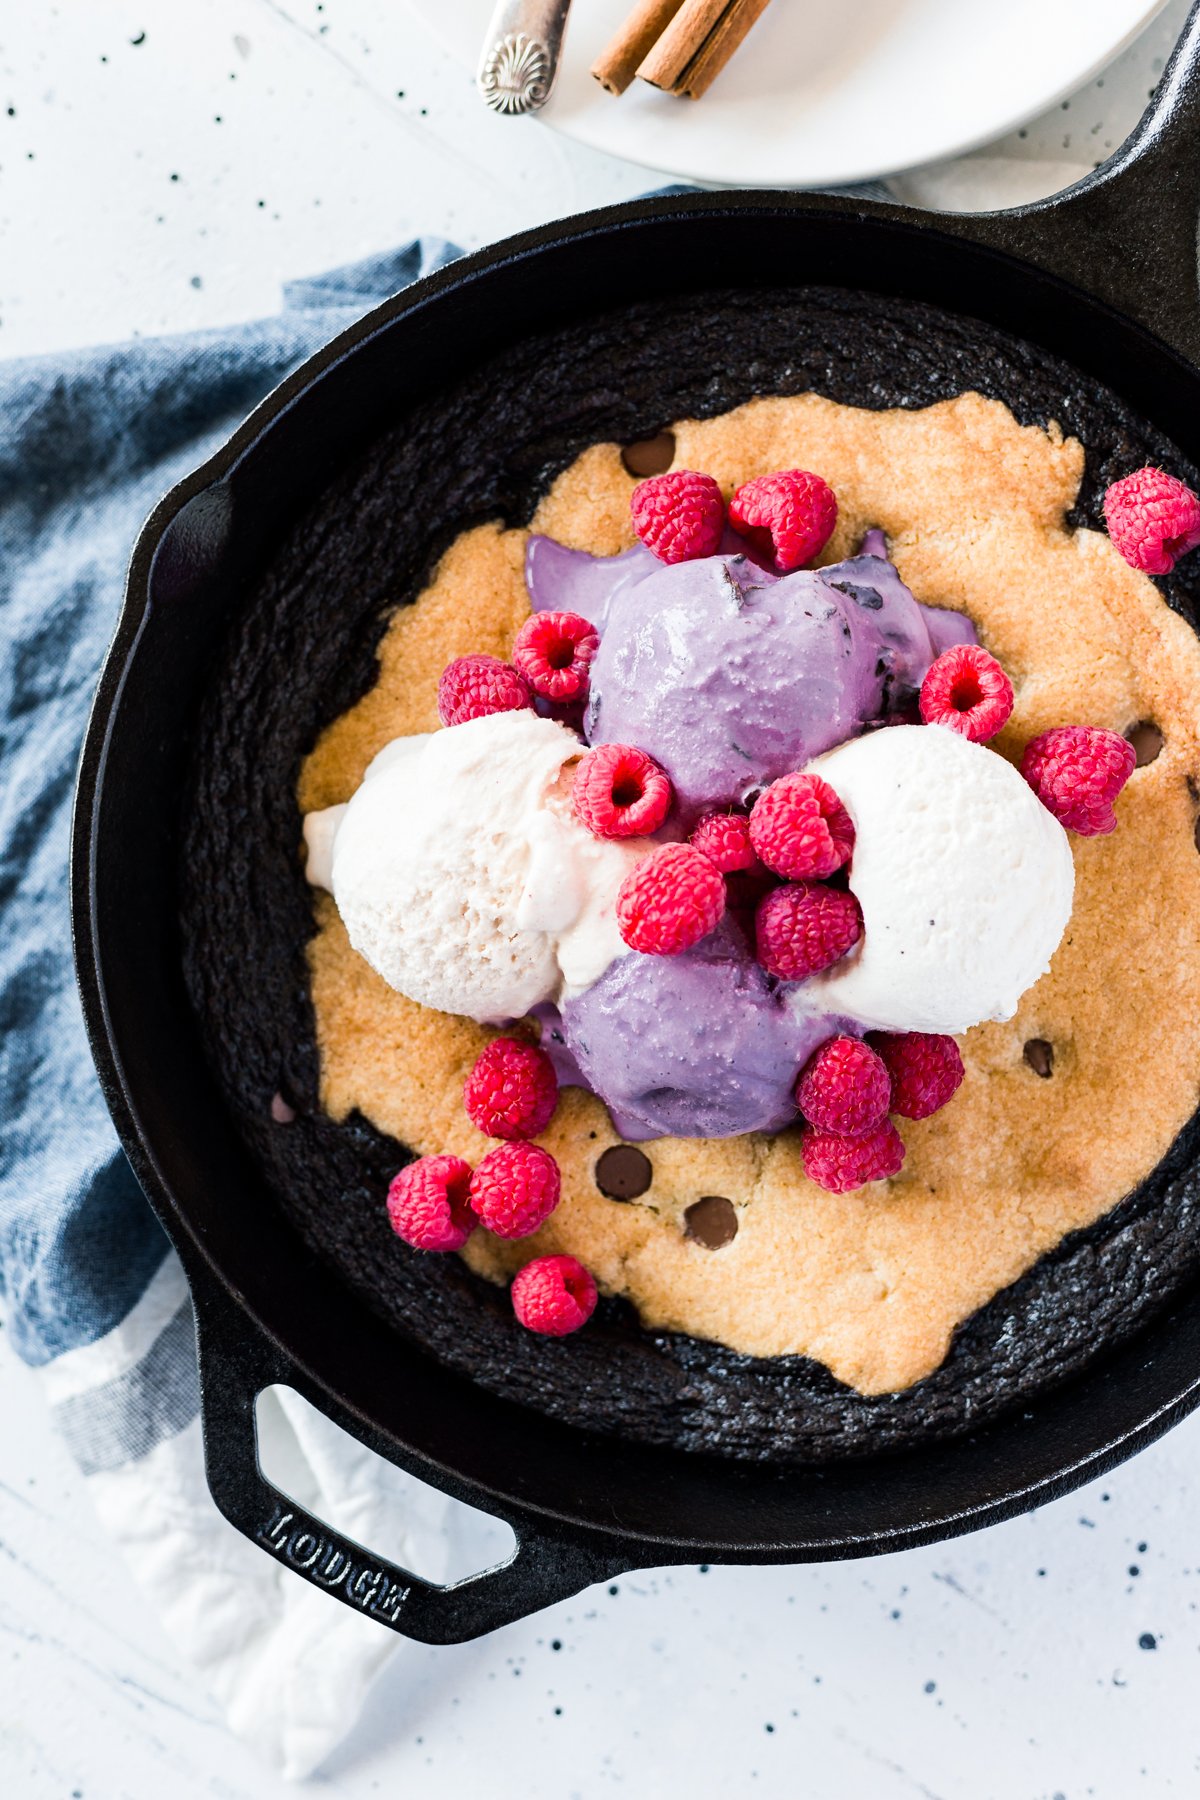 If you're looking for easy recipes for dessert, this Raspberry Ripple Skillet Brookie is a definite crowd-pleaser! Serve with your favorite ice cream and enjoy! | asimplepantry.com 